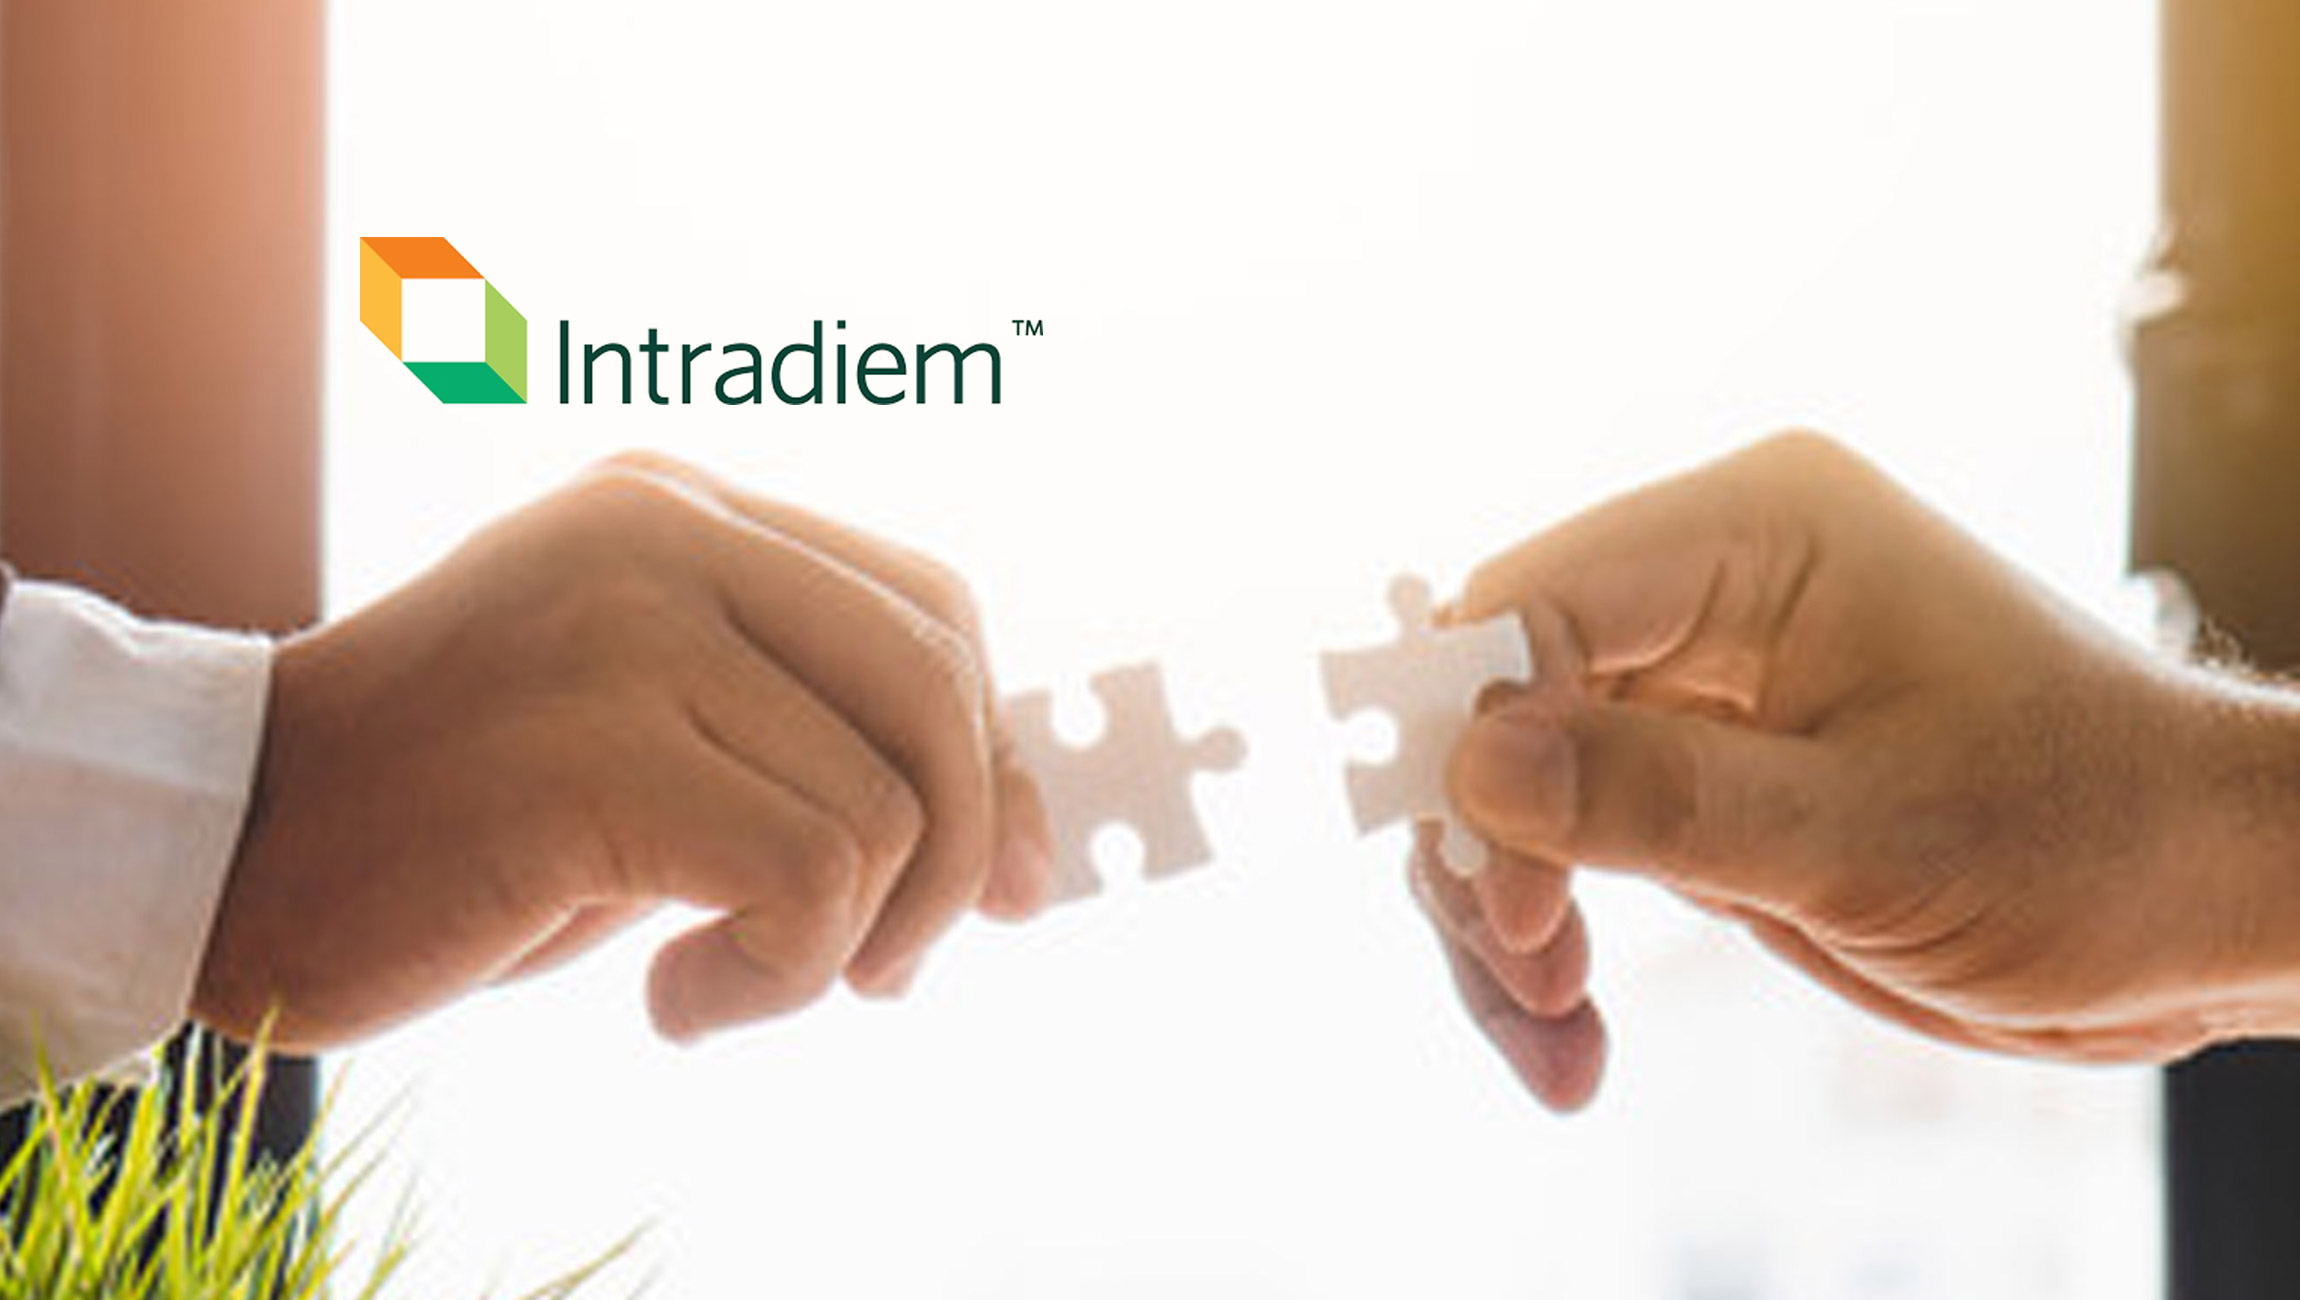 Intradiem Expands Integrations Library to Include Cloud, Chat, and CCaaS Capabilities